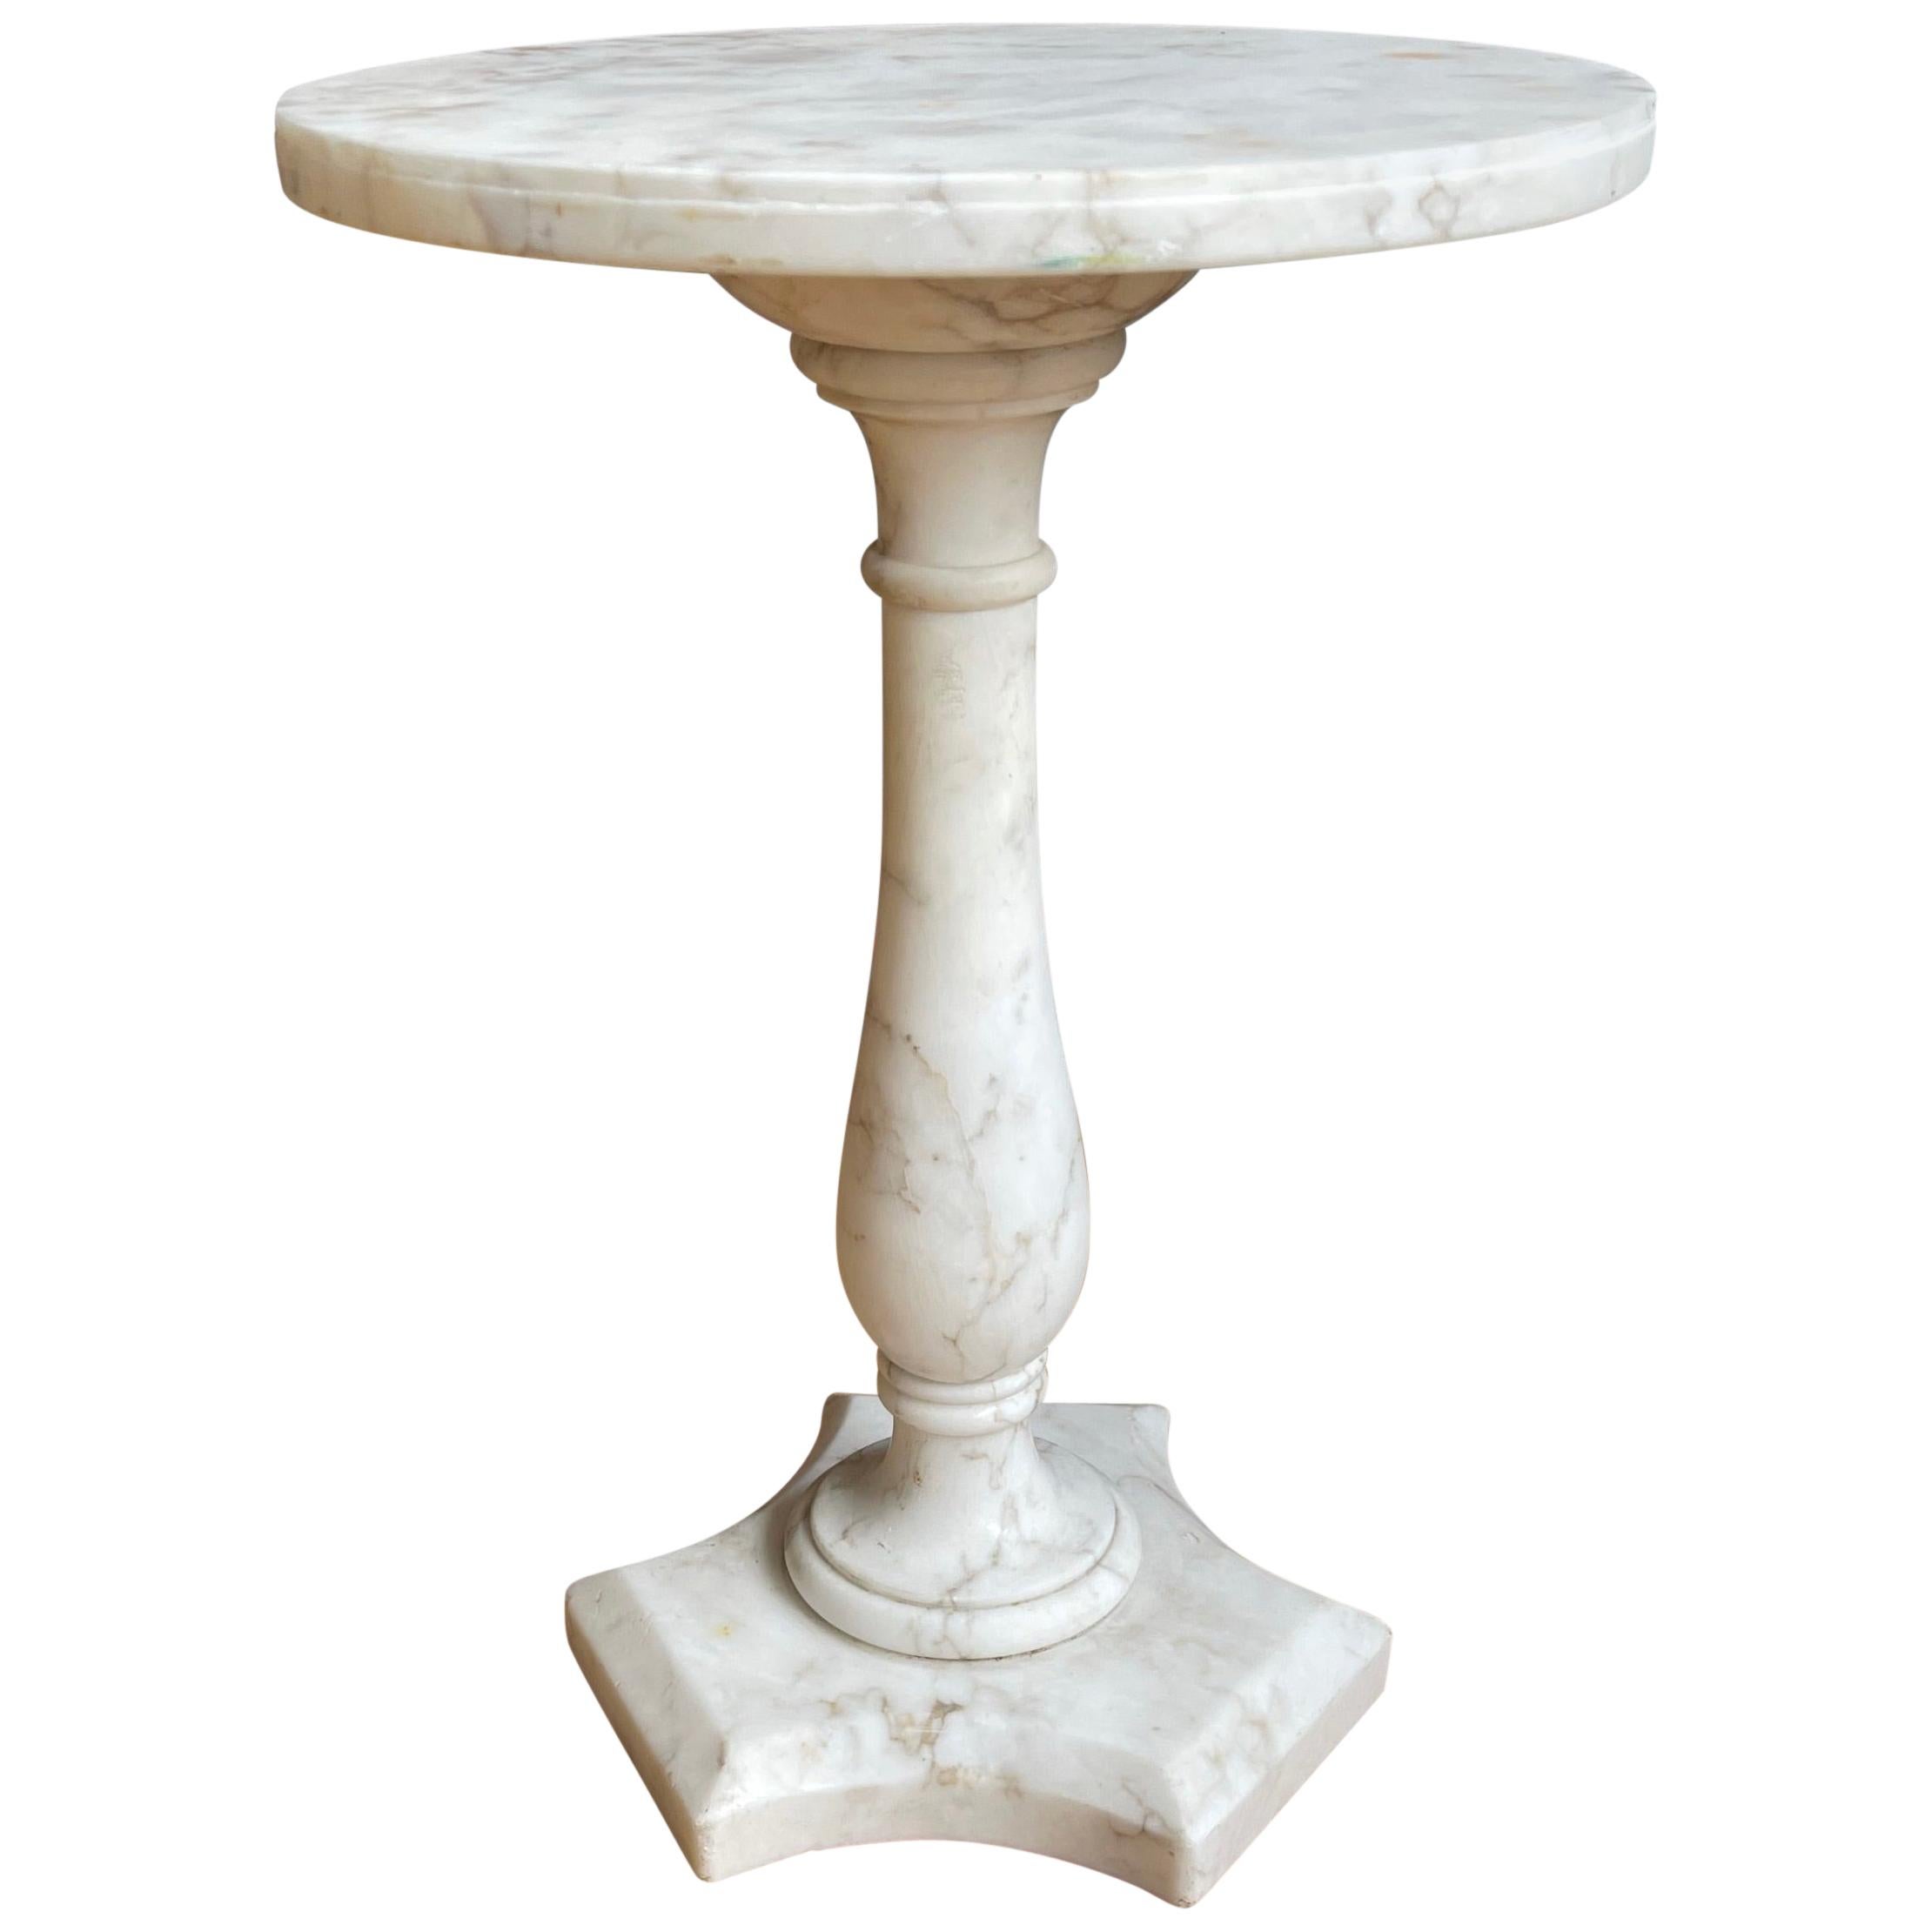 Italian Design Midcentury Modern White Carrara Marble Pedestal Stand / End Table For Sale